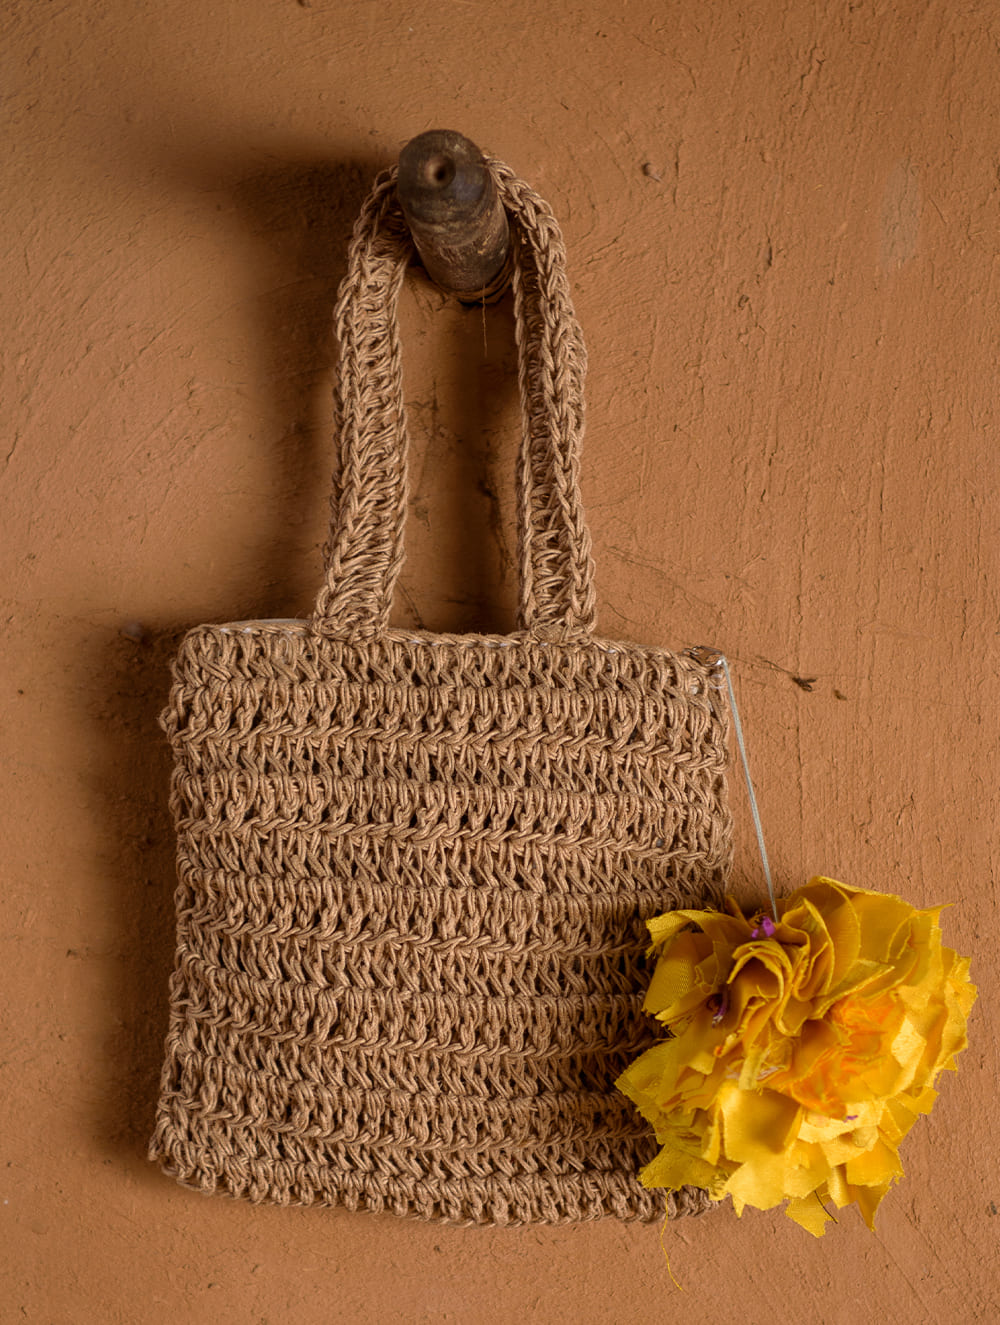 Make your own macrame purse - Gathered